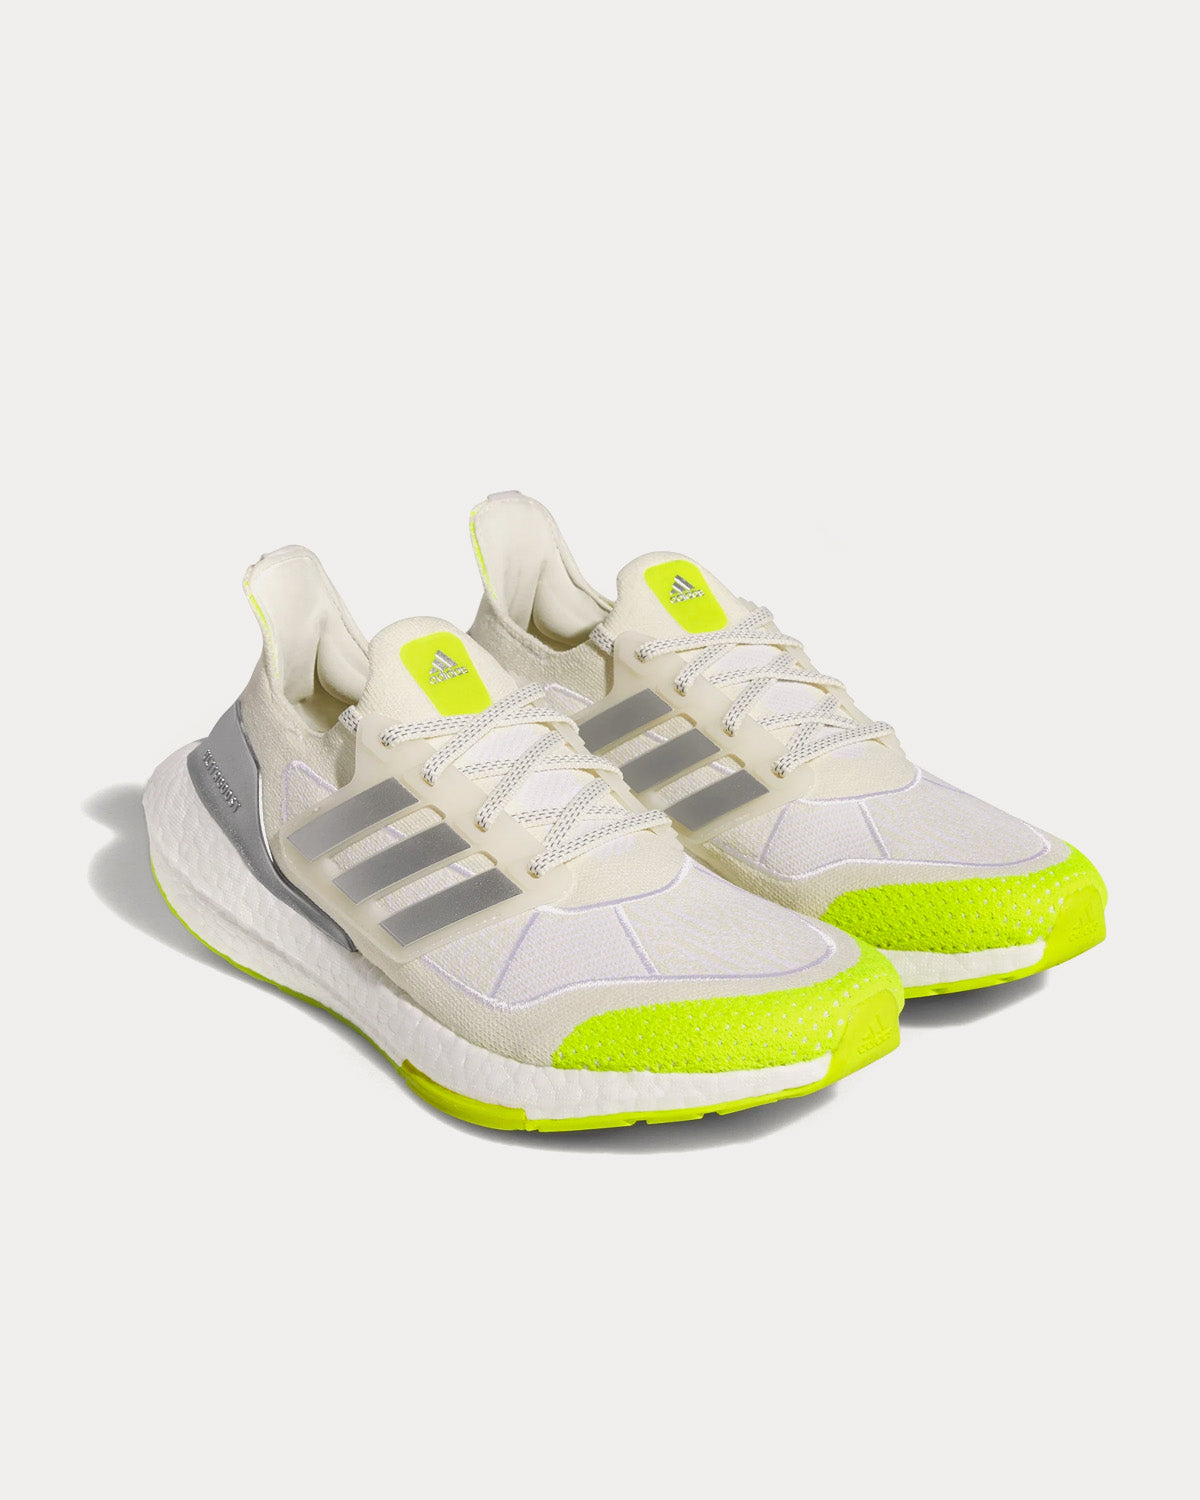 Adidas x Ivy Park - Ultraboost Off White / Silver Metallic / Cloud White Running Shoes